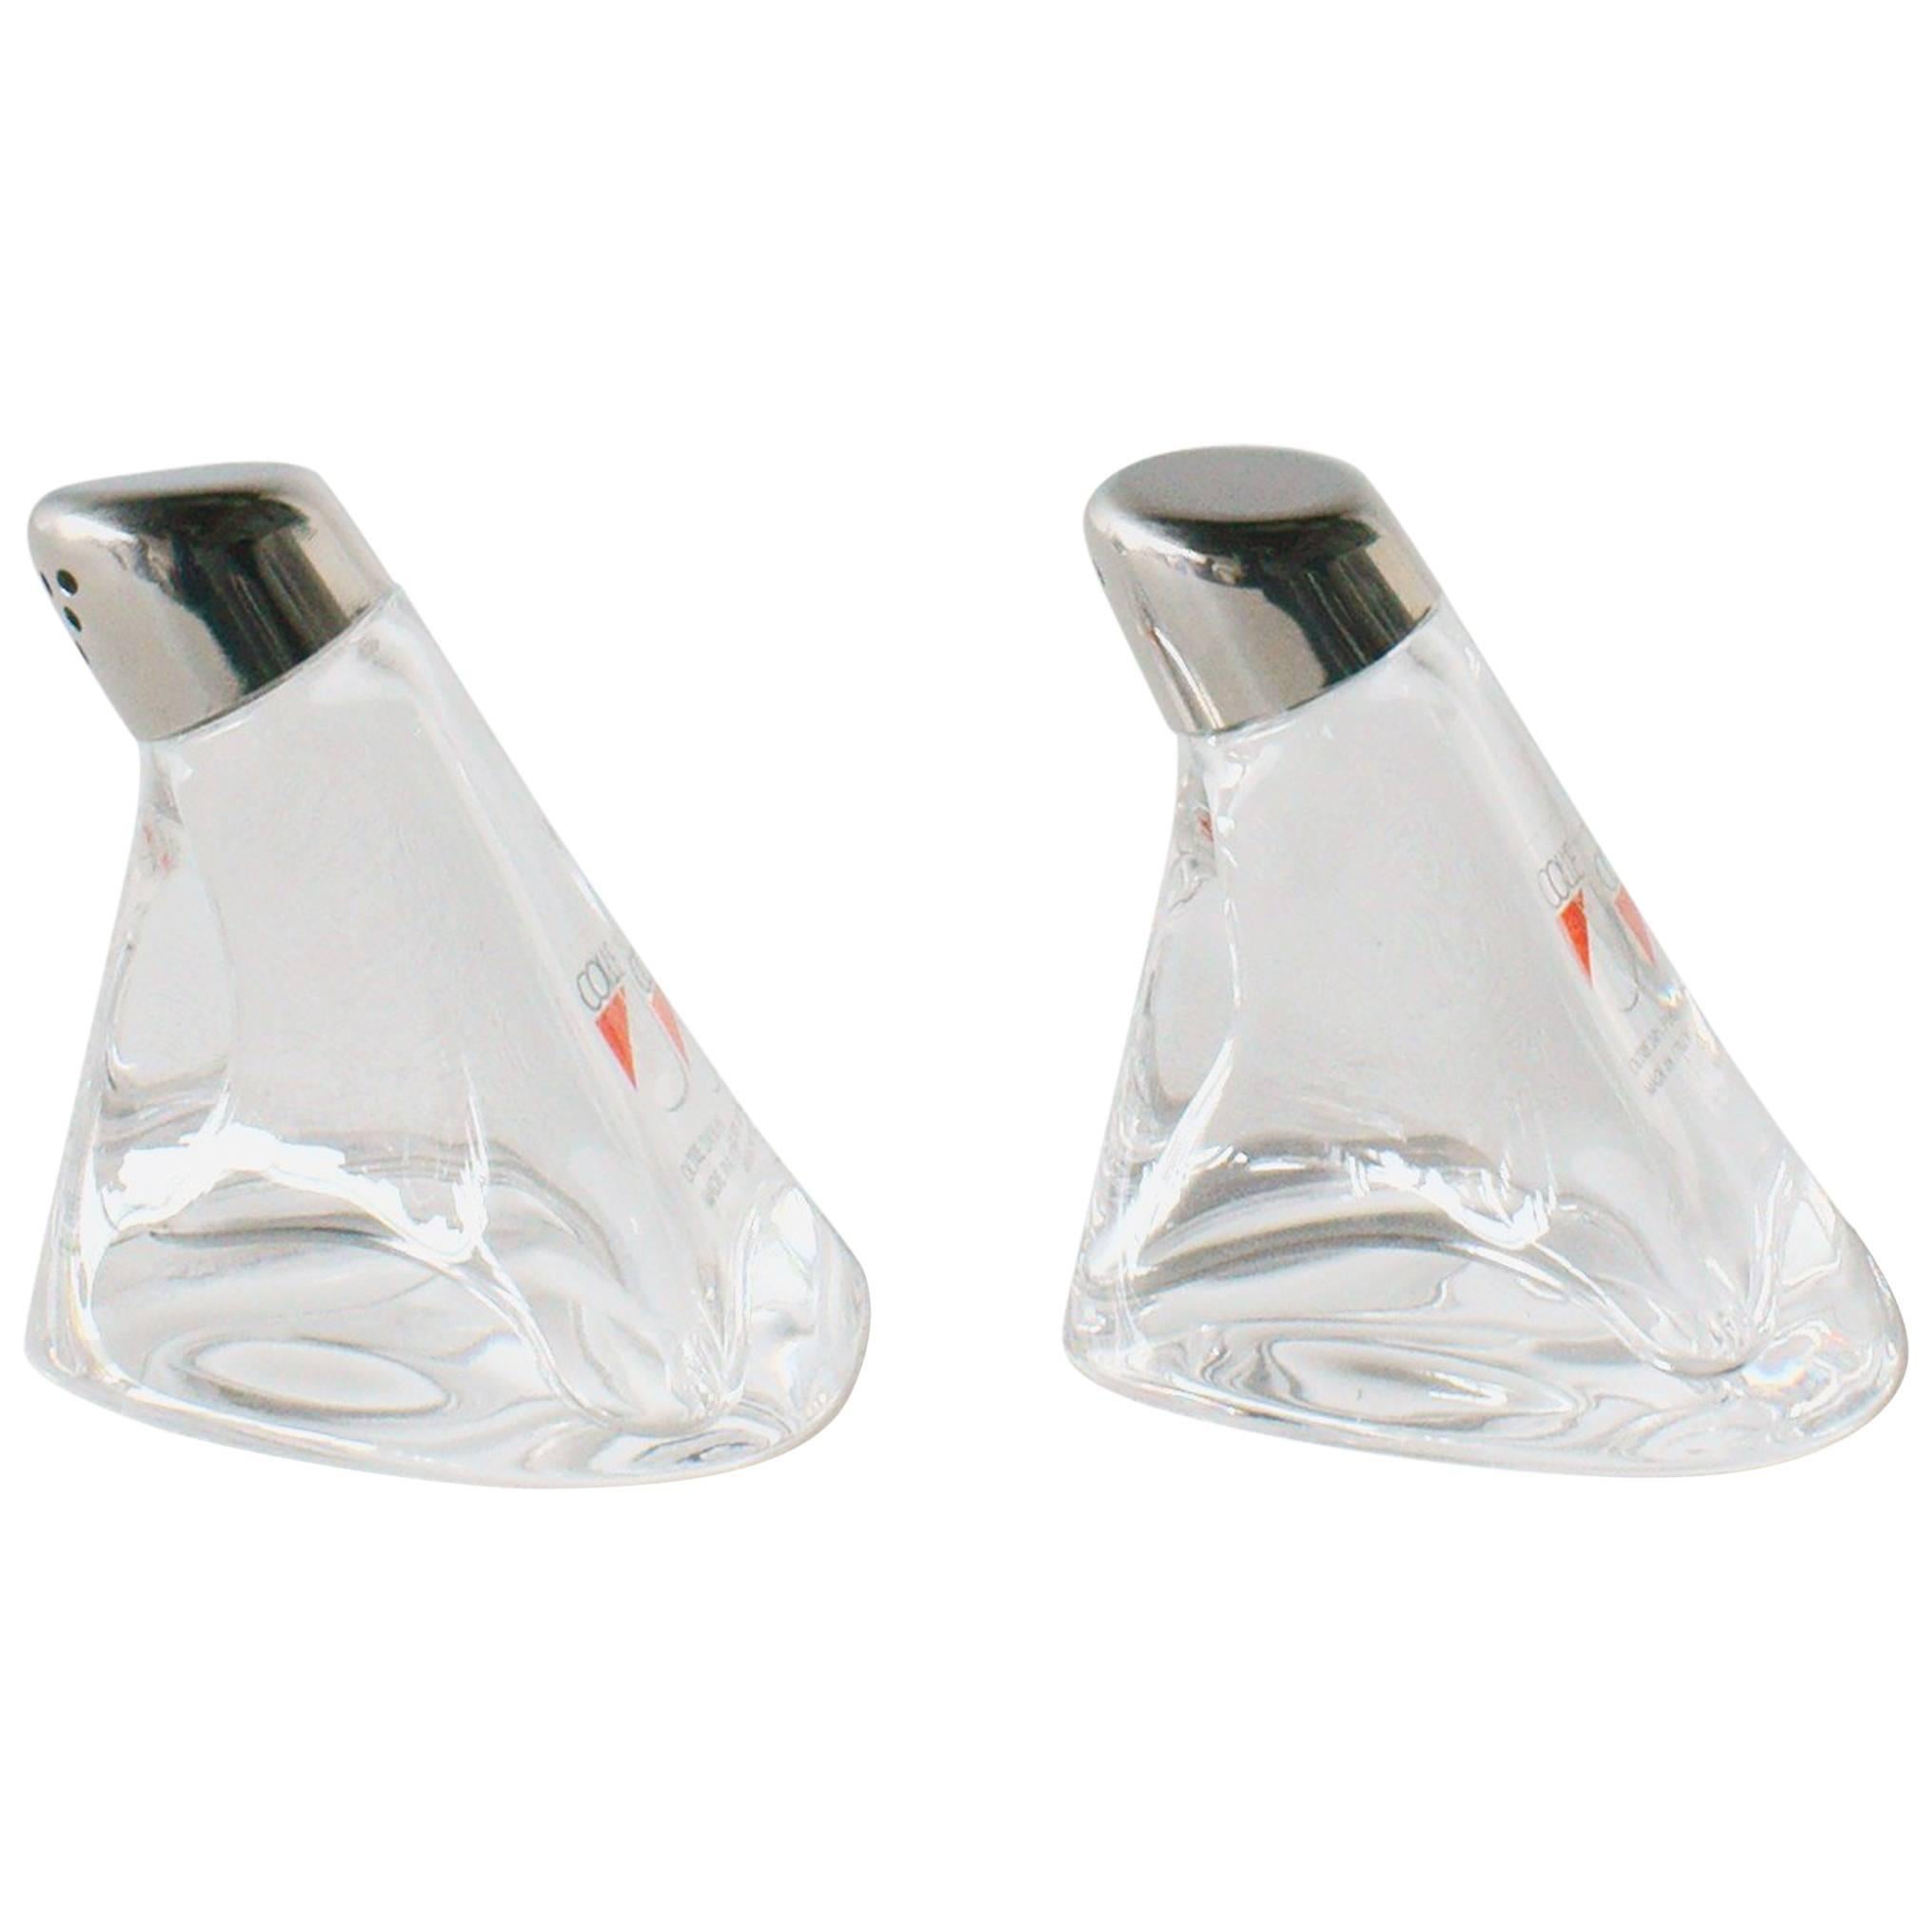 Angelo Maniarotti Salt and Pepper for Colle